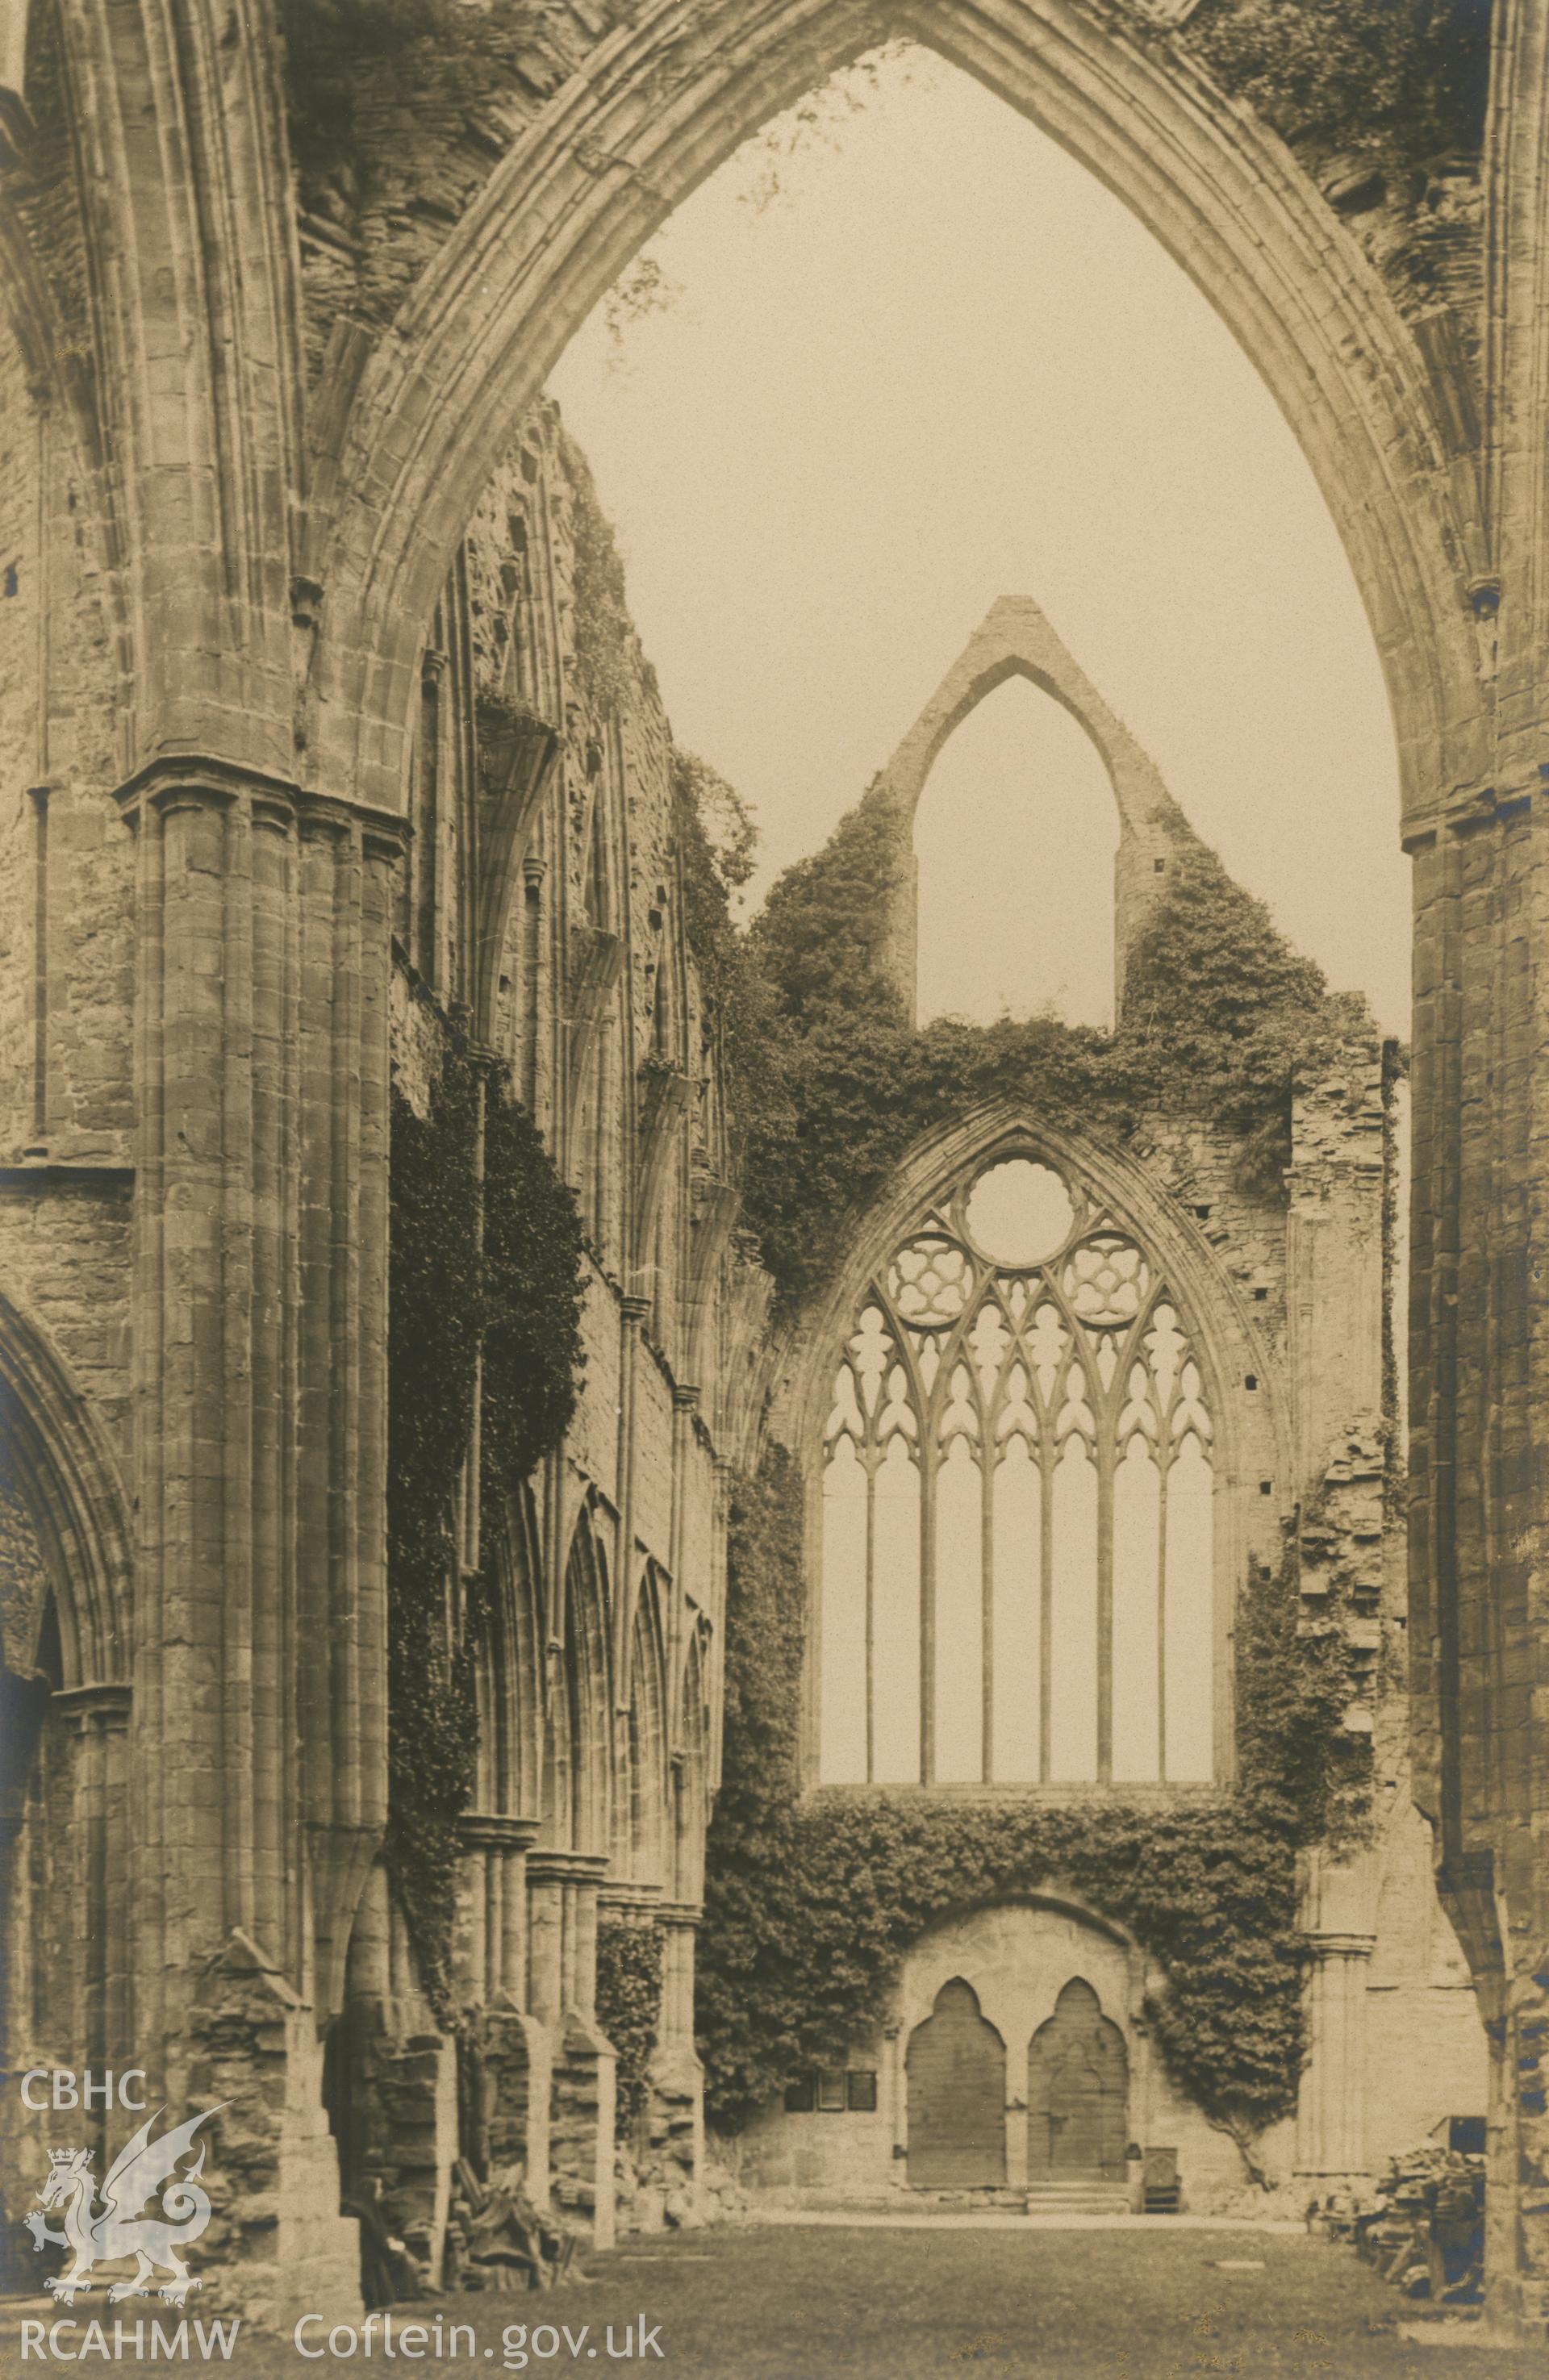 Digital copy of an interior view of Tintern Abbey looking west.